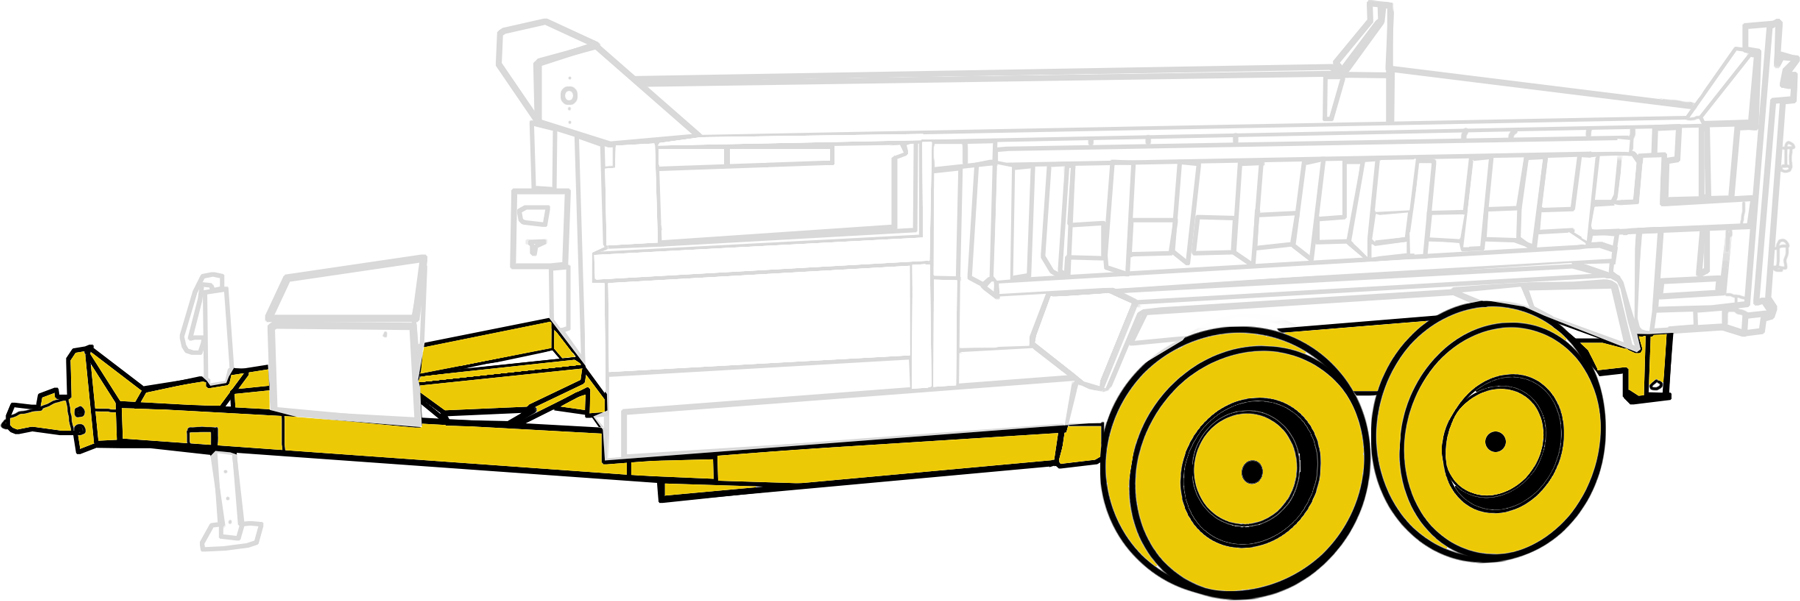 Griffin Trailers - Chassis Specifications